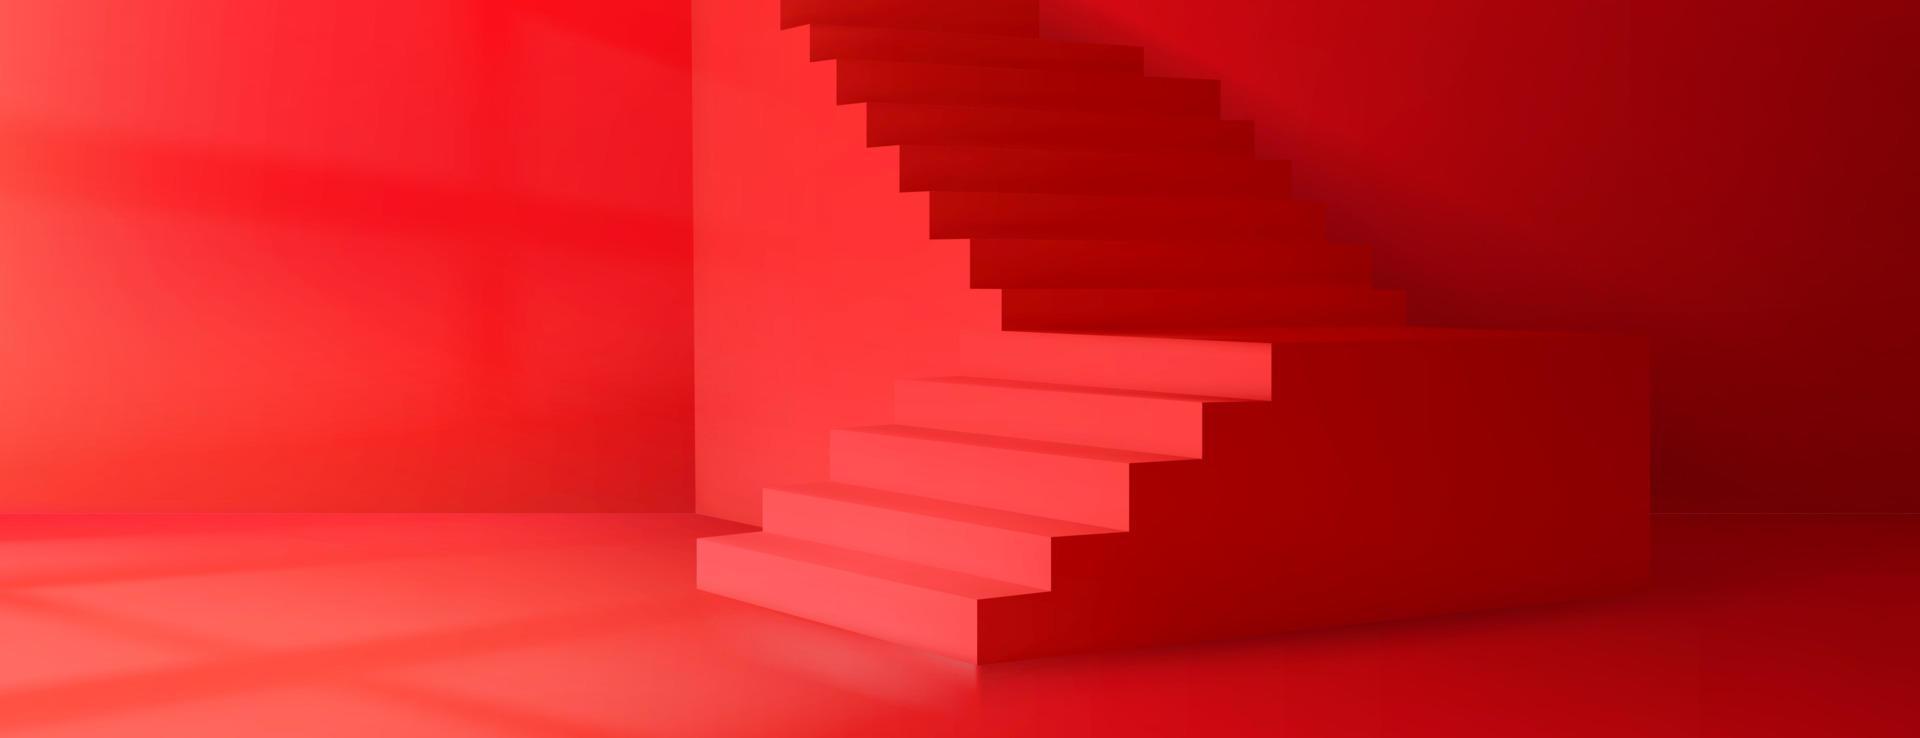 3d vector room with stairs, red wall background